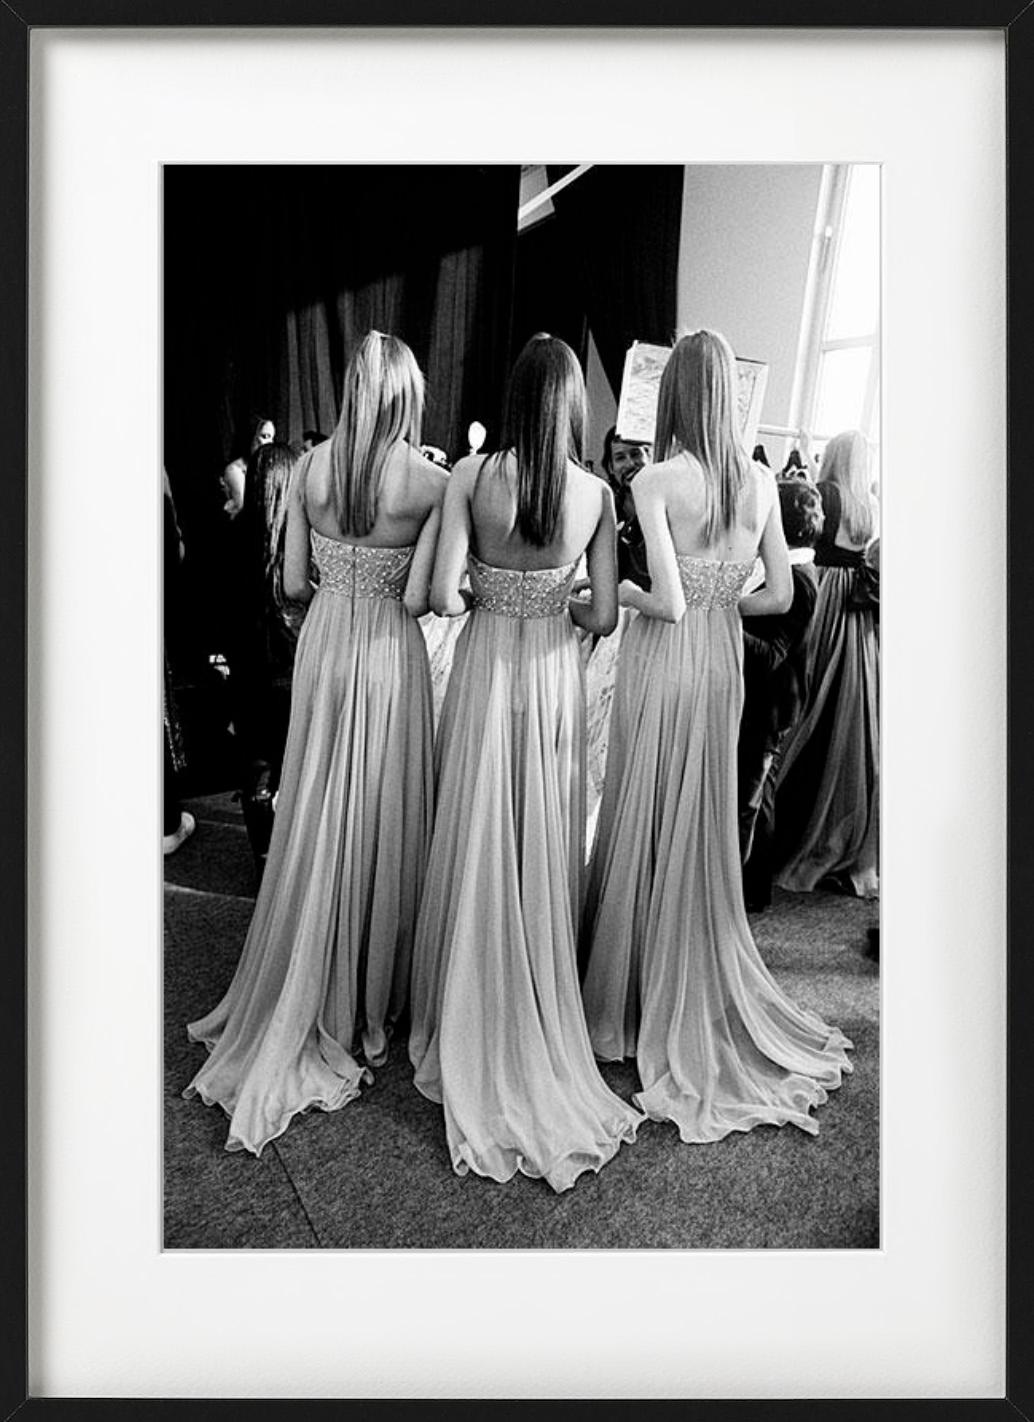 'Elie Saab Haute Couture' - three models in gowns, fine art photography, 2007 - Contemporary Photograph by Gérard Uféras